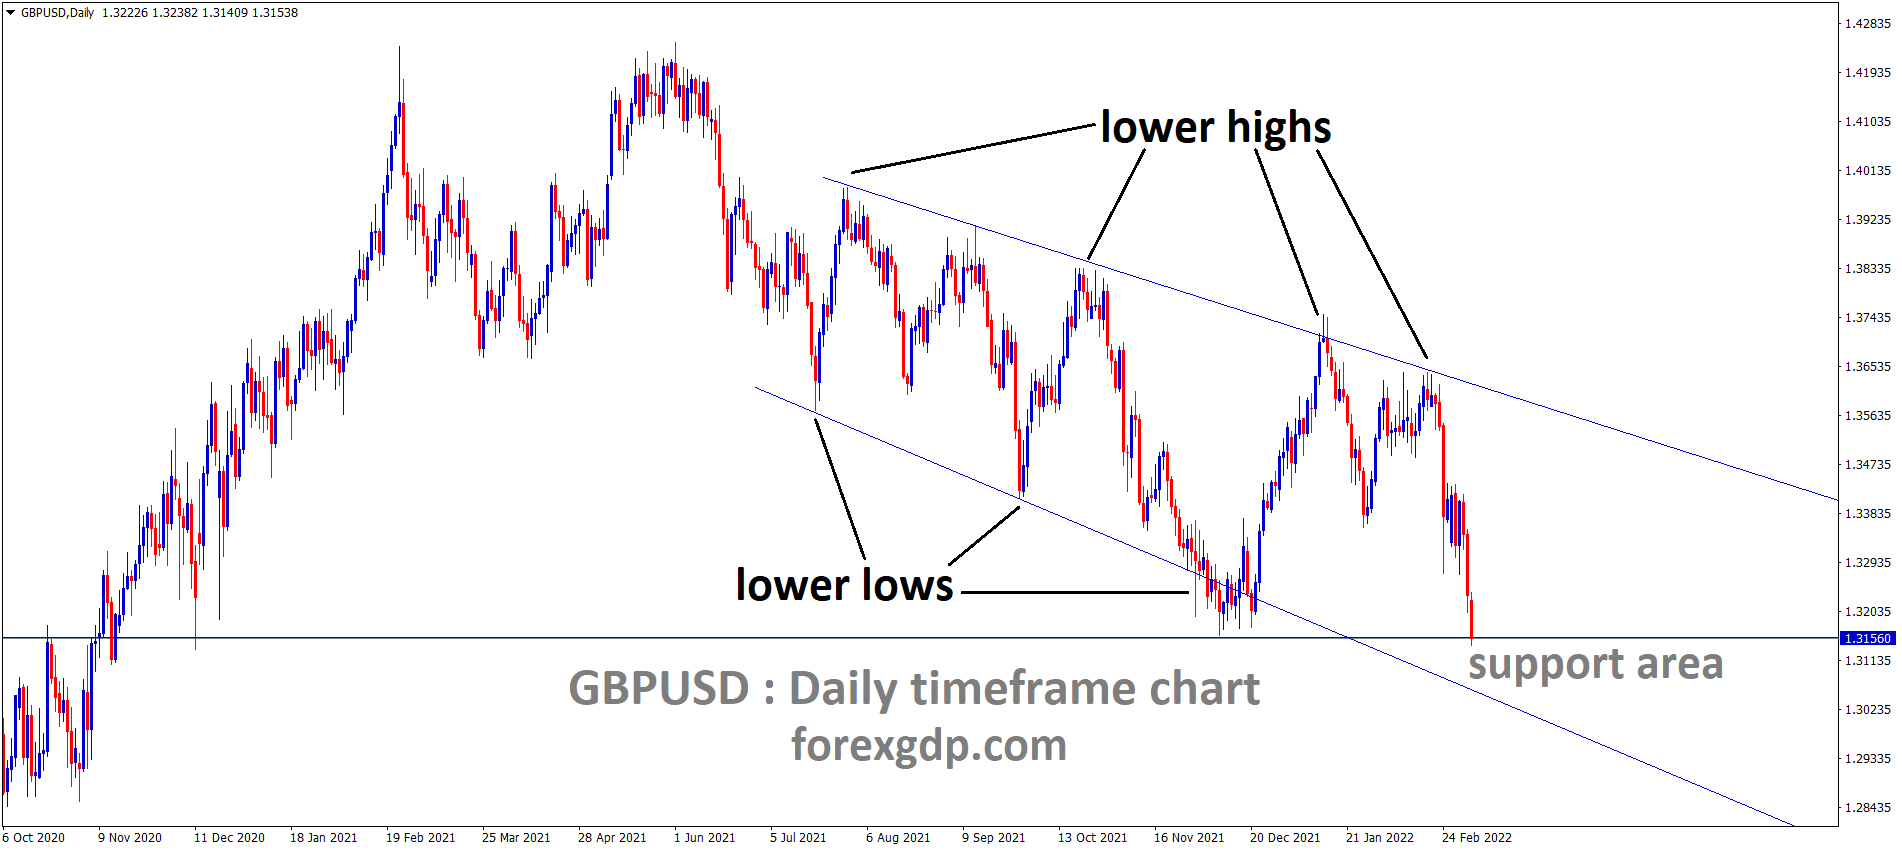 GBPUSD is moving in the Descending channel pattern and the market has reached the Support area of the Pattern.